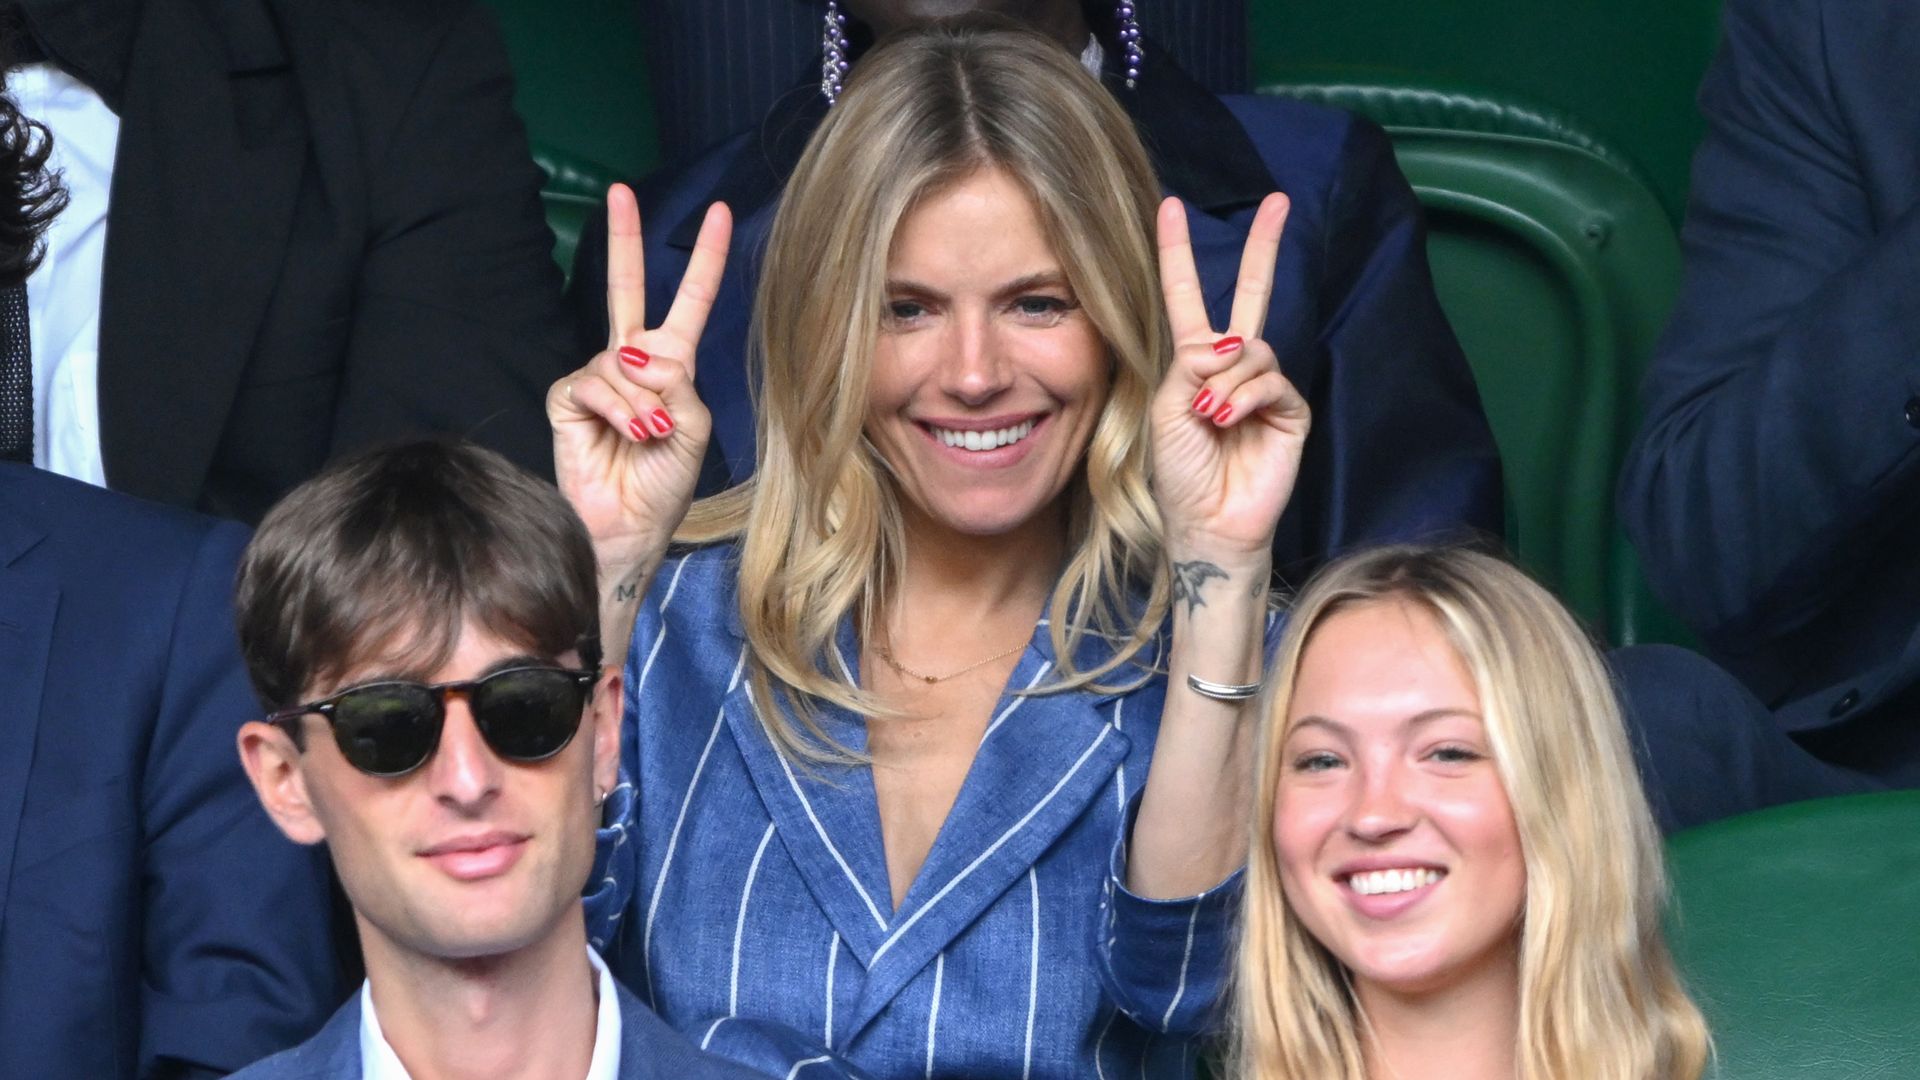 Lila Moss and Yoni Helbitz sat in the crowd at Wimbledon with Sienna Miller in the background doing the peace sign 